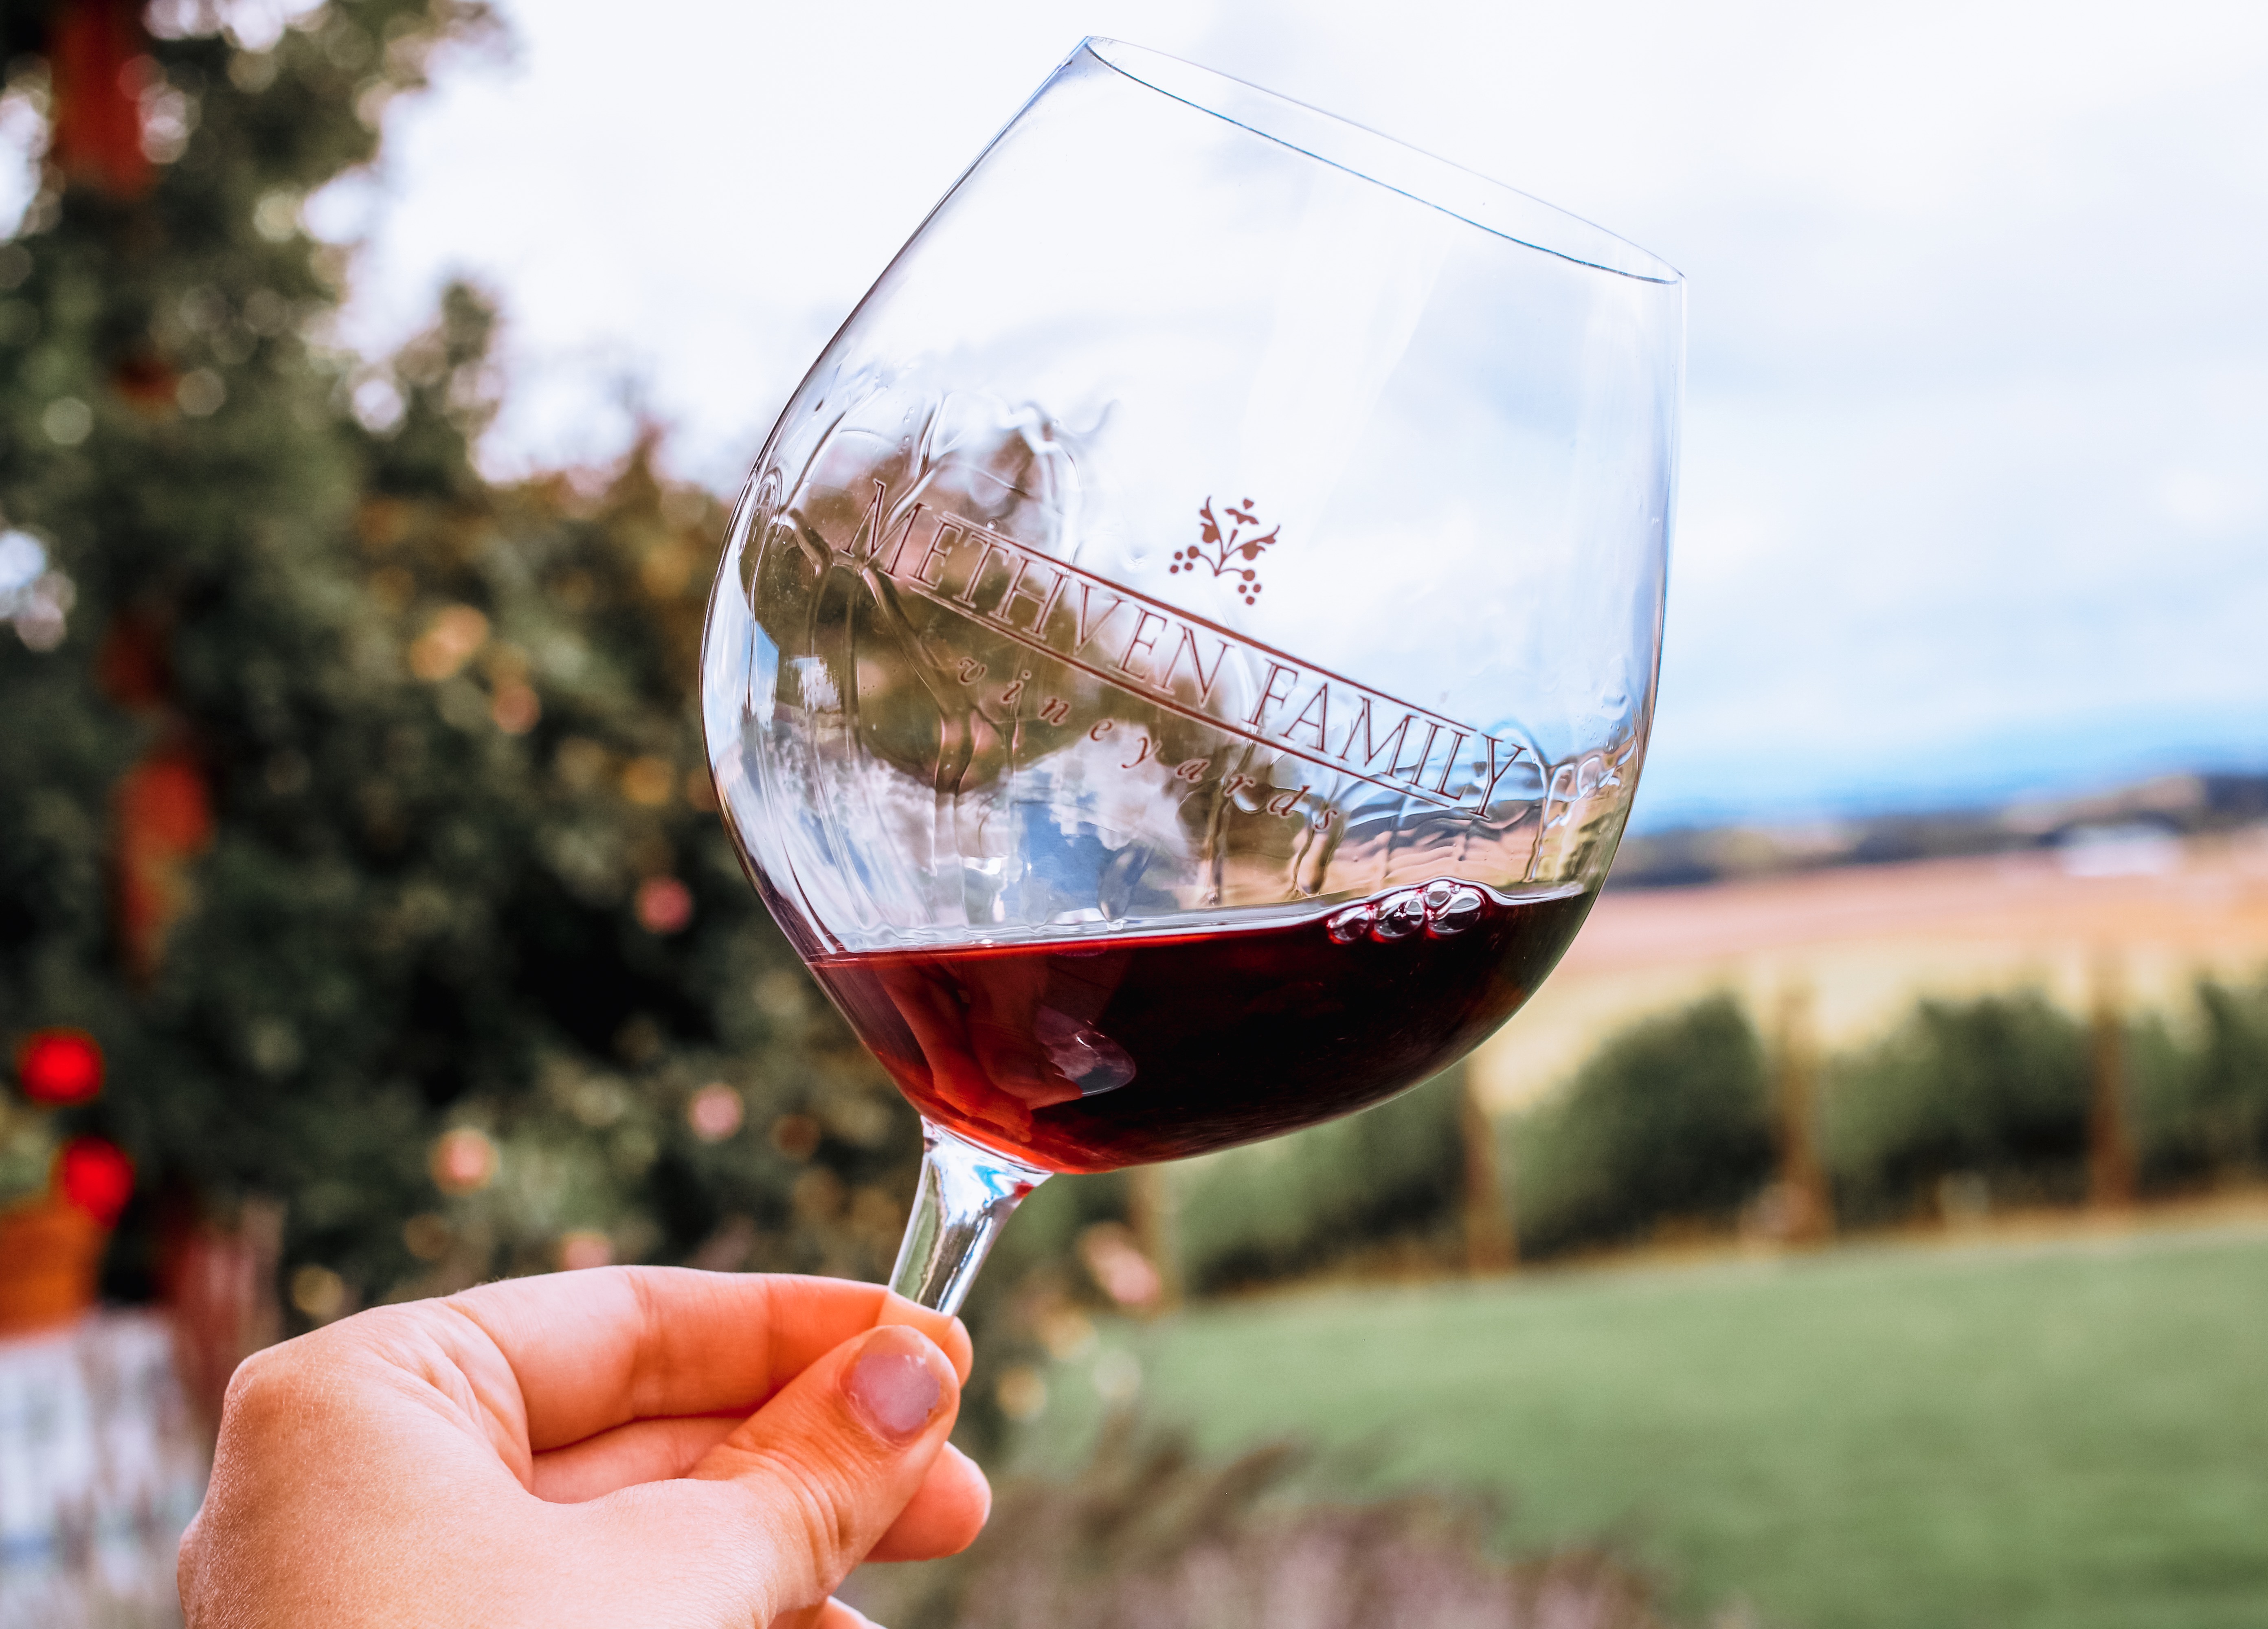 In the foreground, a Methven Family Vineyard branded wine glass, filled part-way with a red pinot, tilted at an angle. In the background, an unfocused view of our estate vines and some evergreens on the edges of the picture.